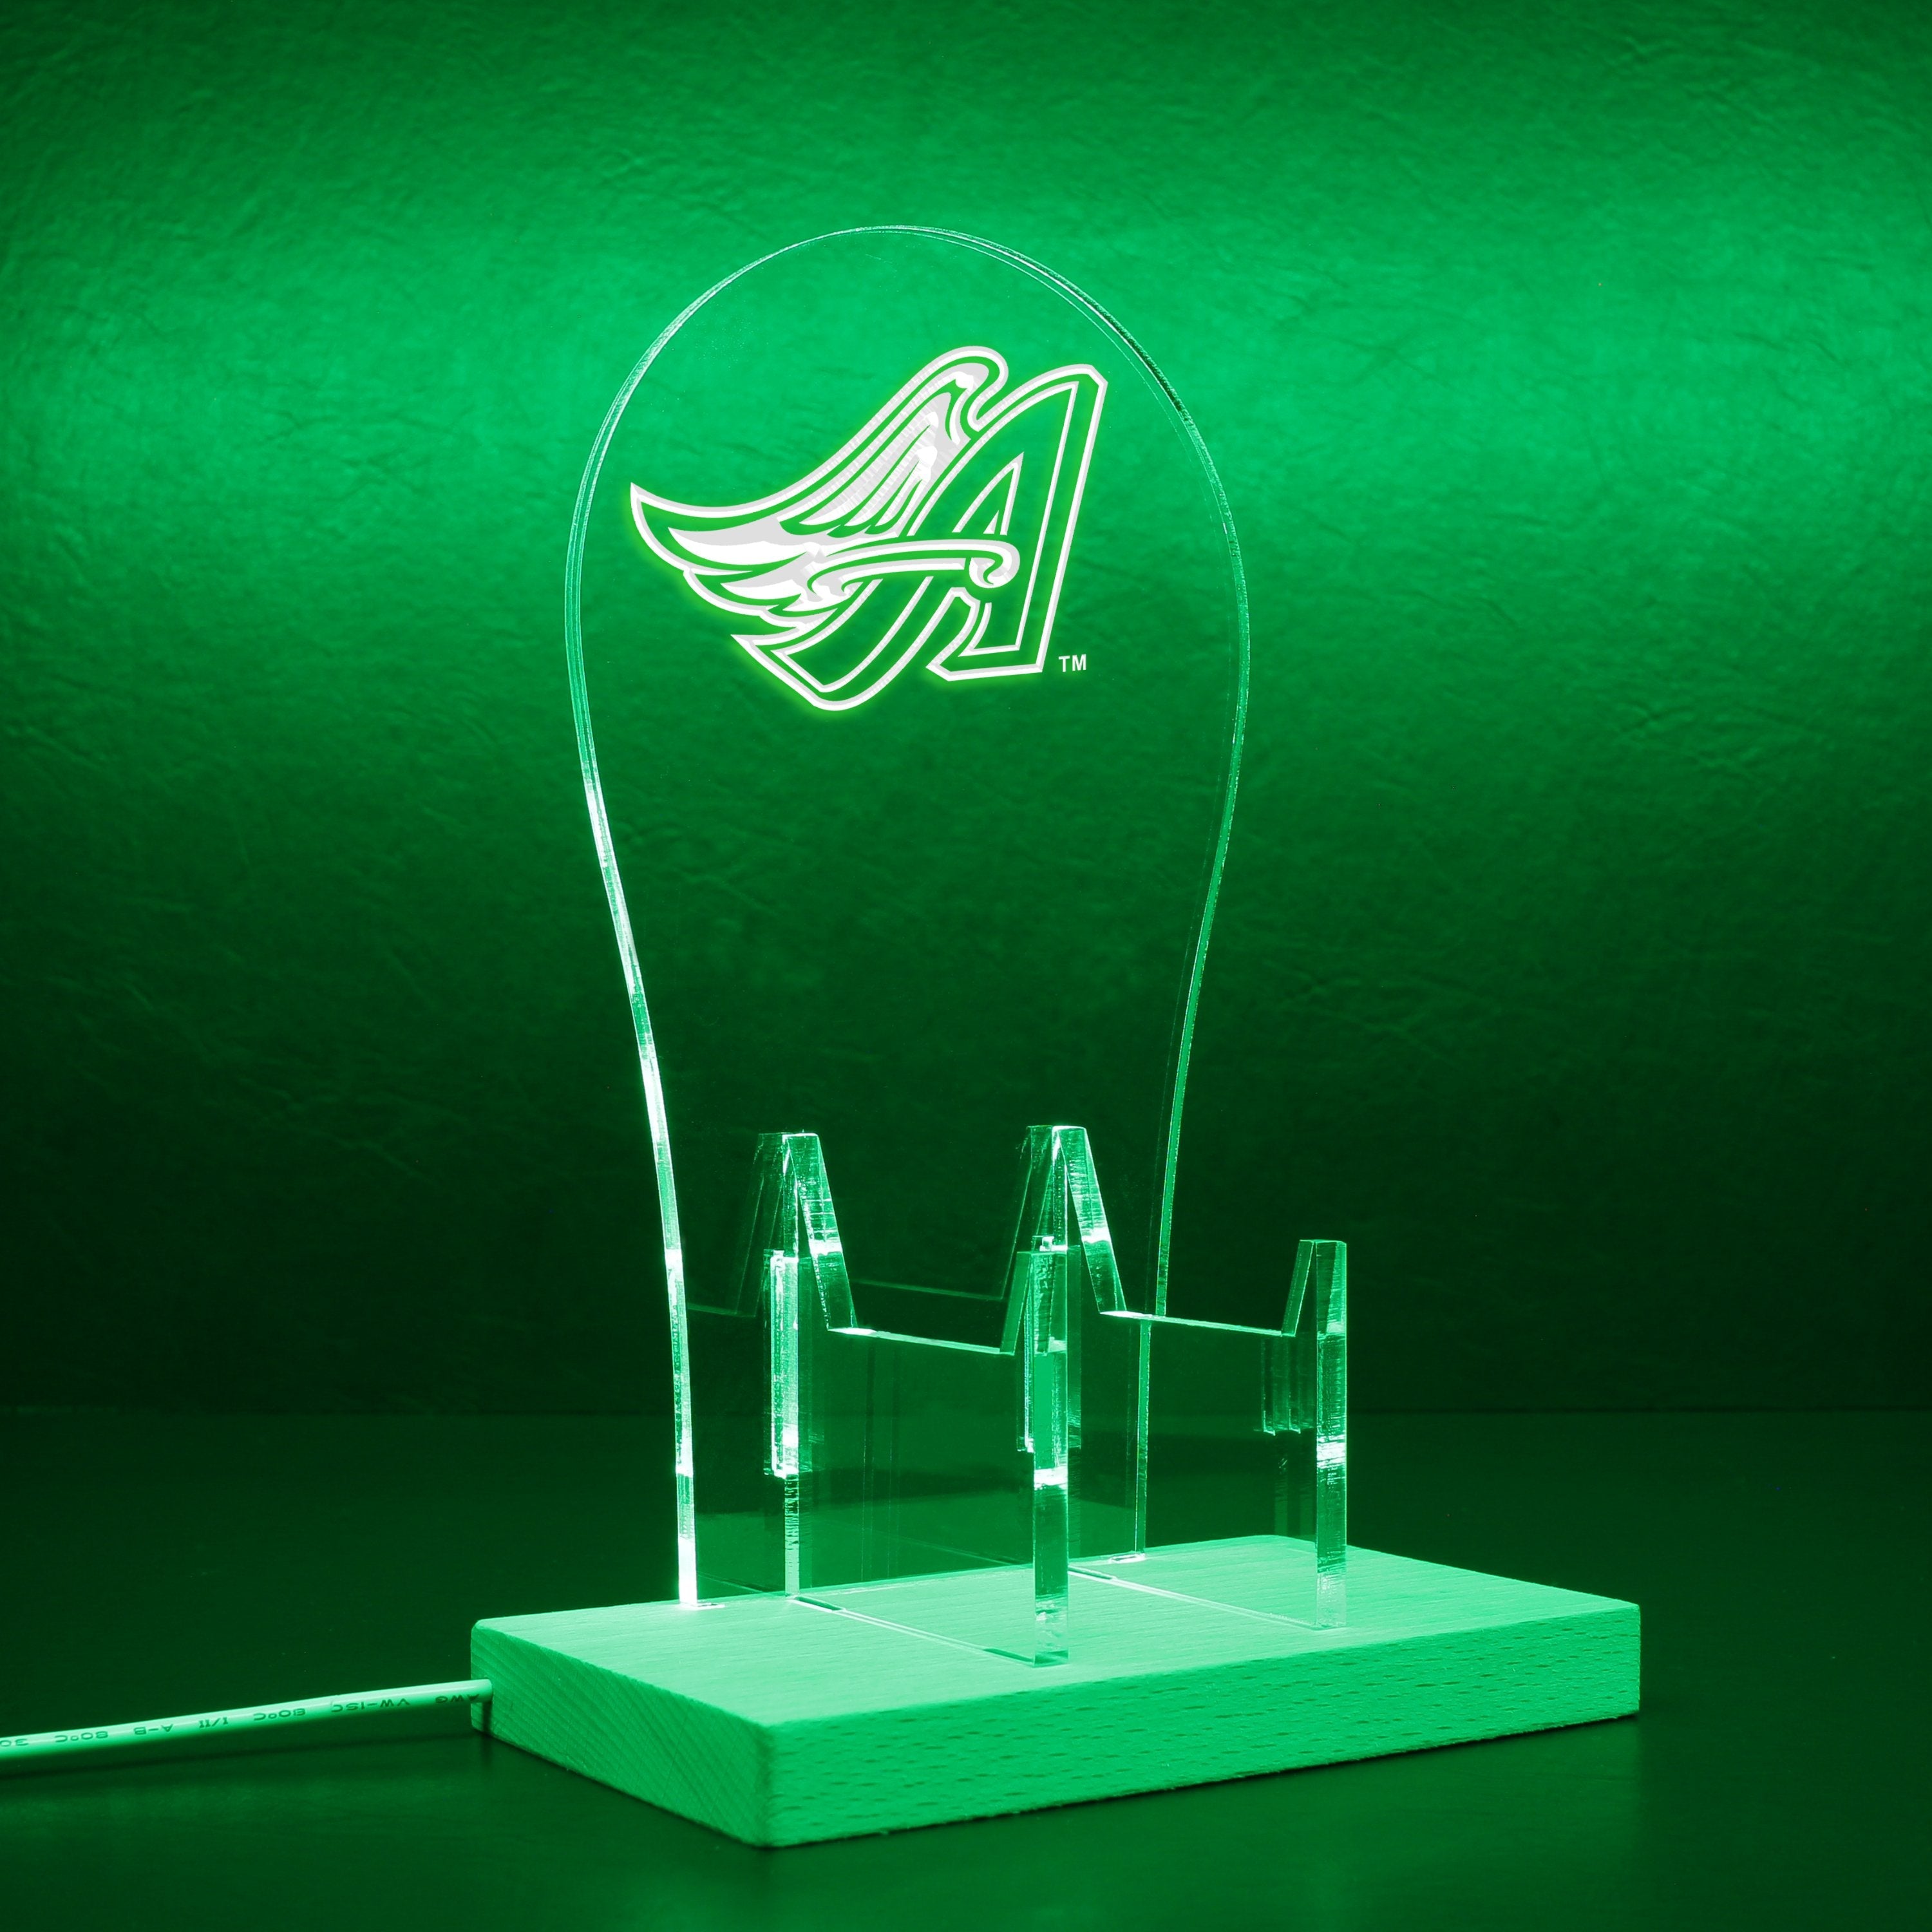 Los Angeles Angels LED Gaming Headset Controller Stand